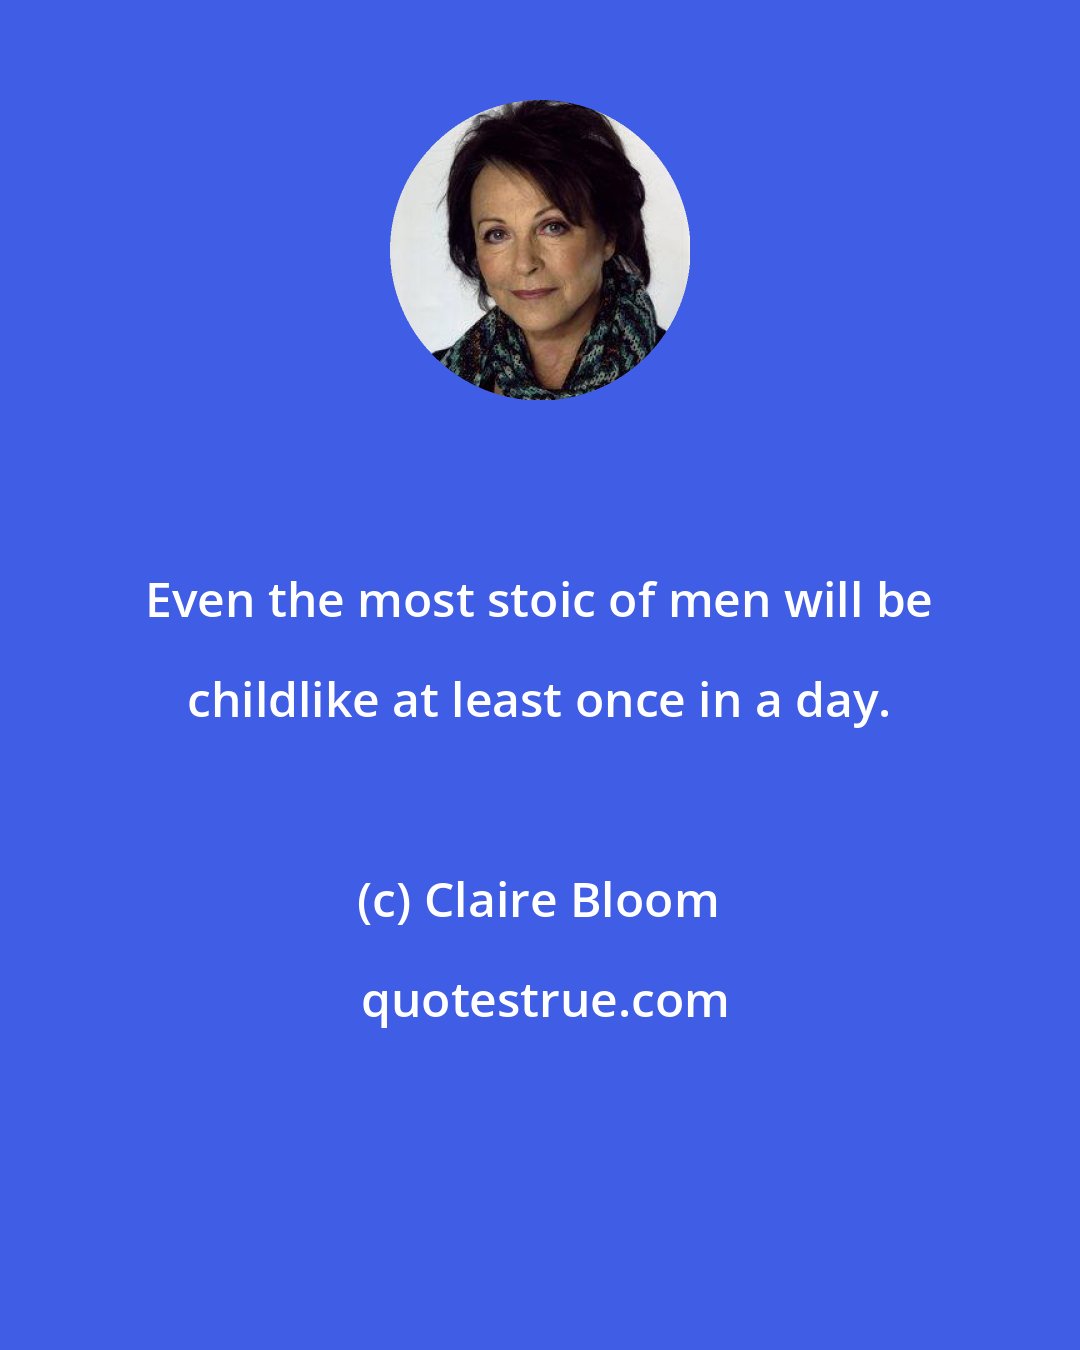 Claire Bloom: Even the most stoic of men will be childlike at least once in a day.